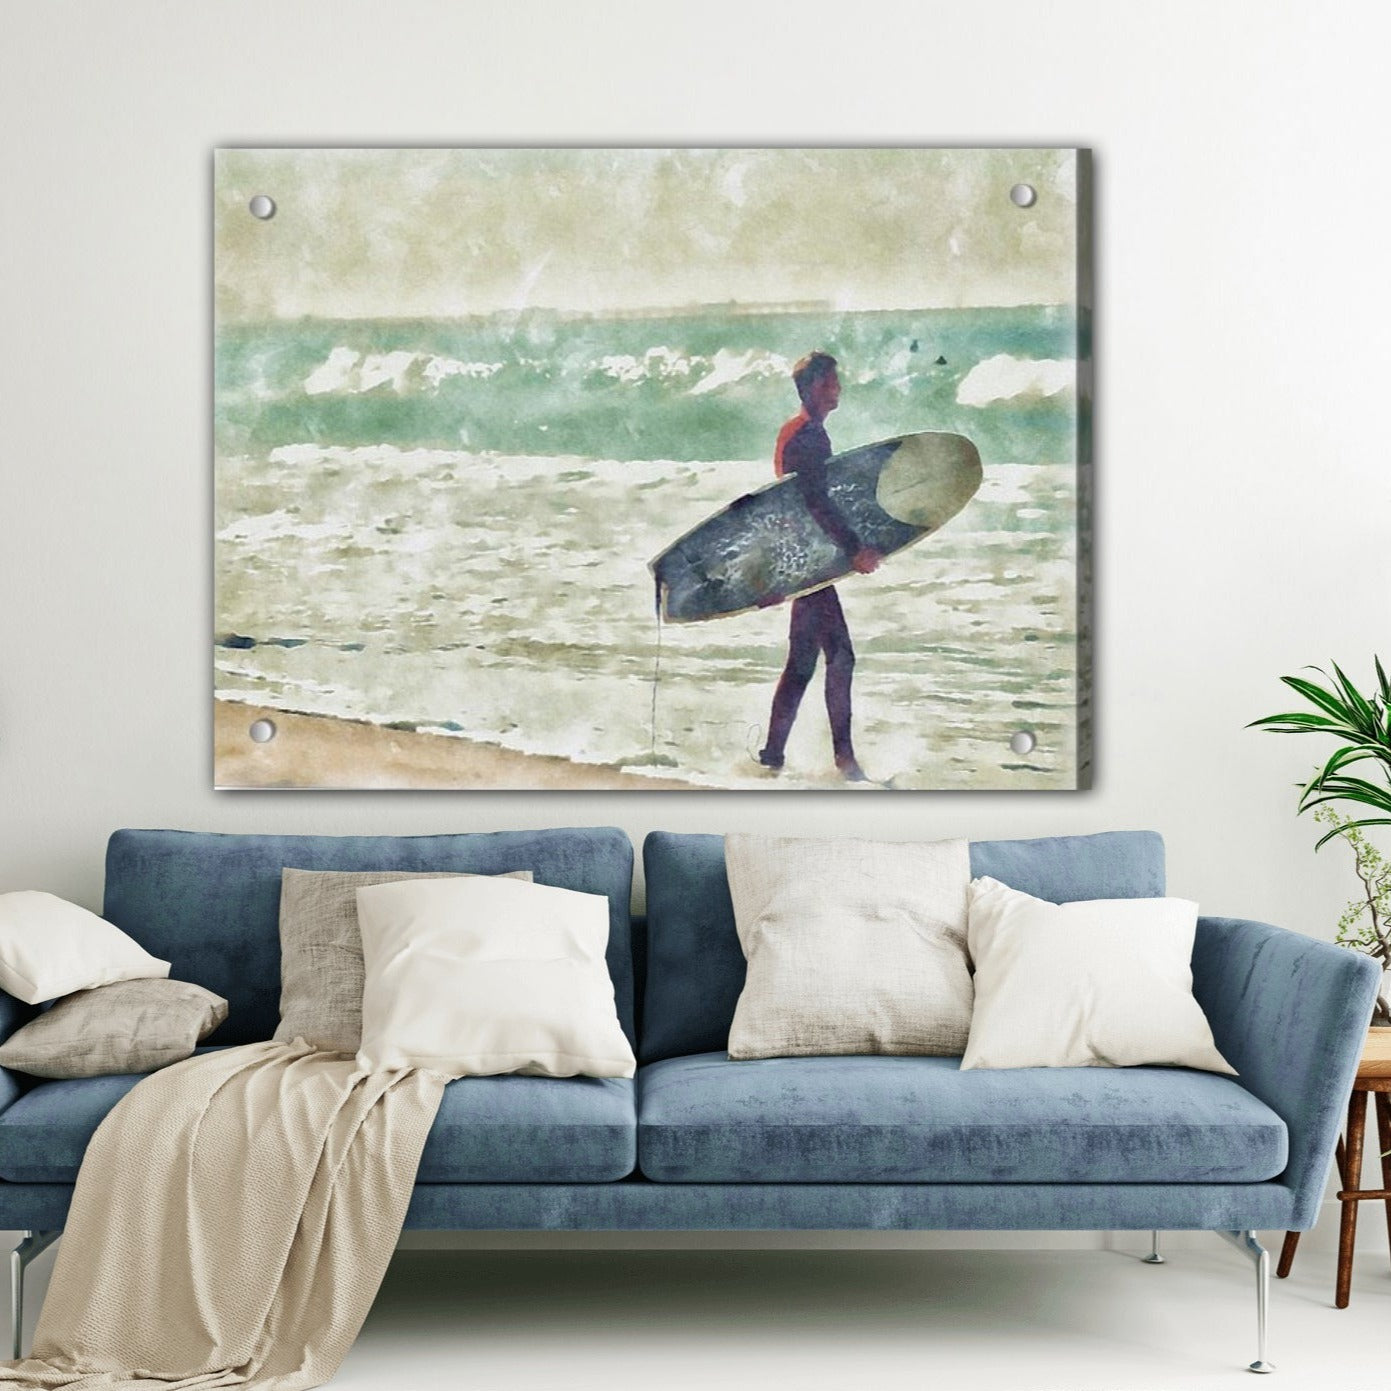 heading out to surf mission beach ca acrylic home decor print by jacqueline mb designs 